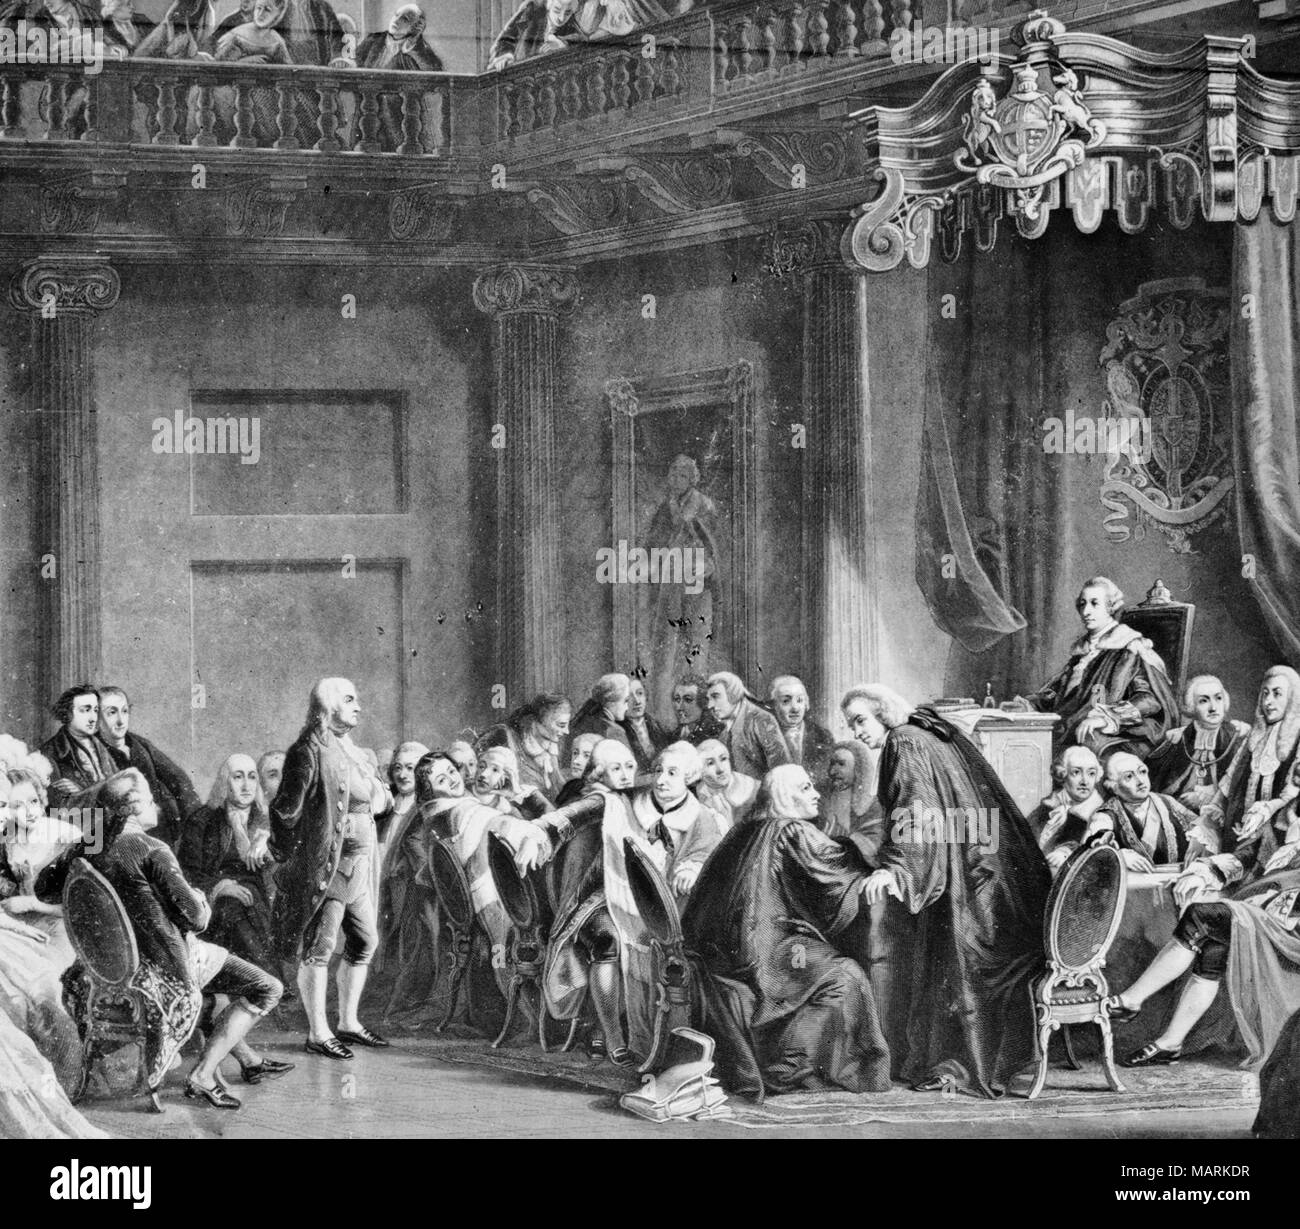 Benjamin Franklin at the Court of St. James; Image depicts the session of the Privy Council in which Franklin is harangued for his role in the Hutchinson Letters Affair in 1774. Franklin leaves England not long after, committed to American independence. Stock Photo